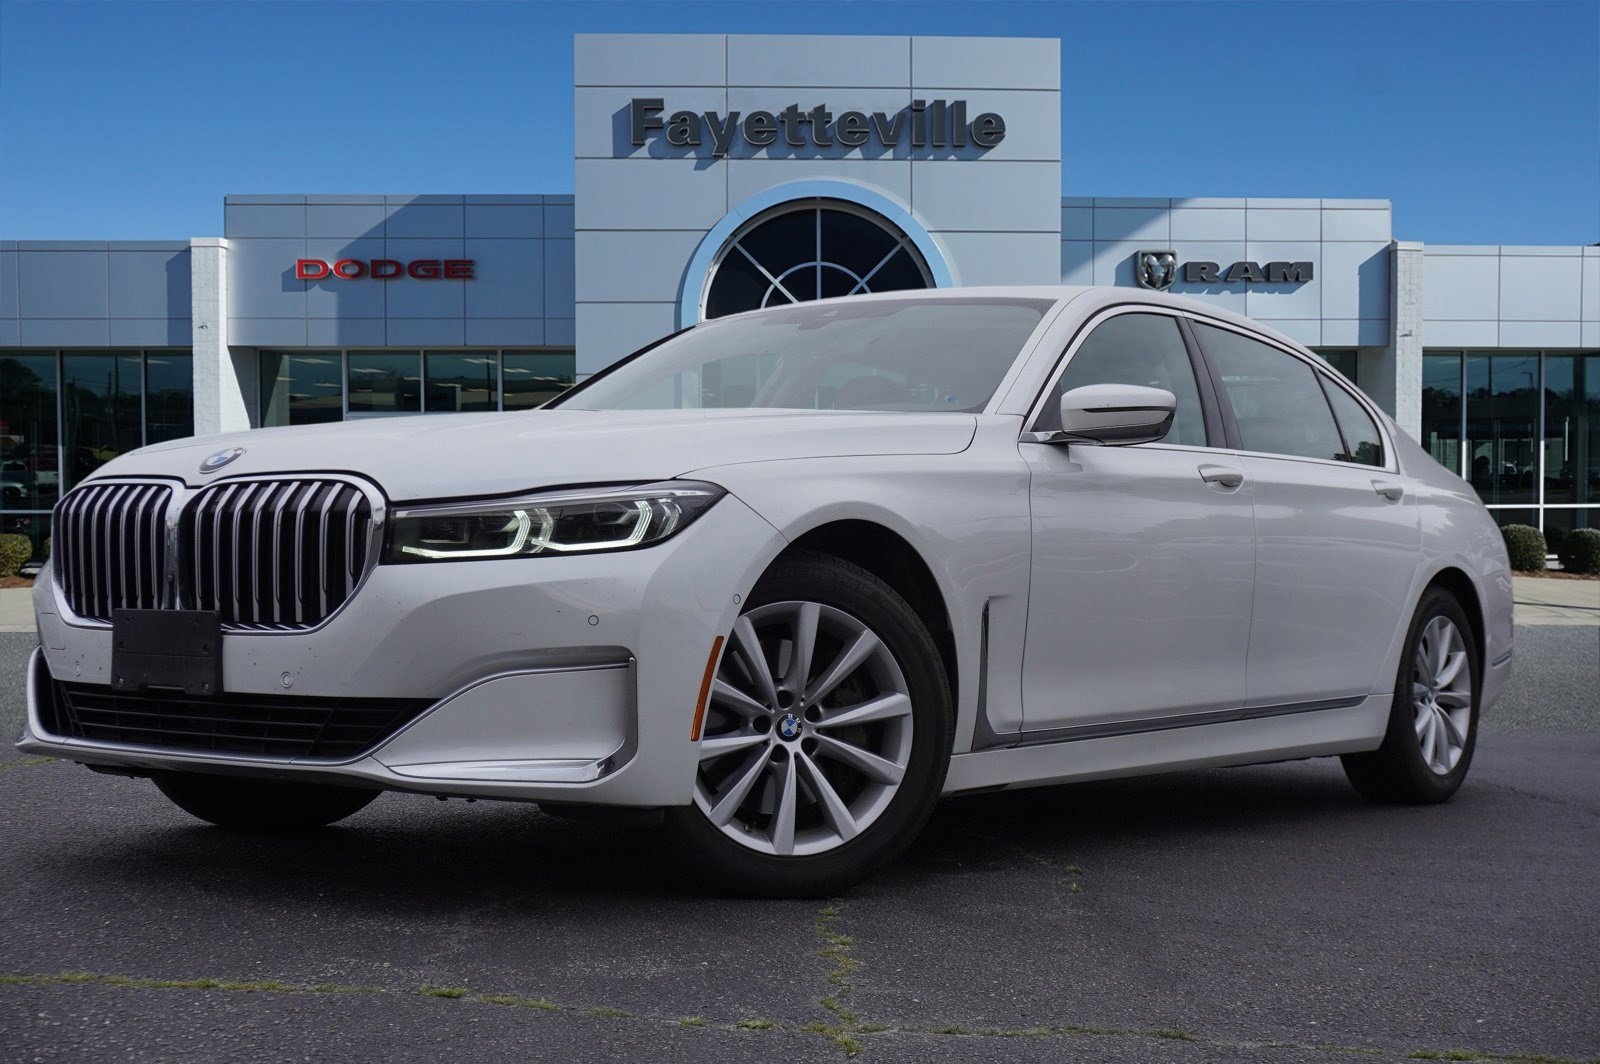 2021 BMW 7 Series Fayetteville NC